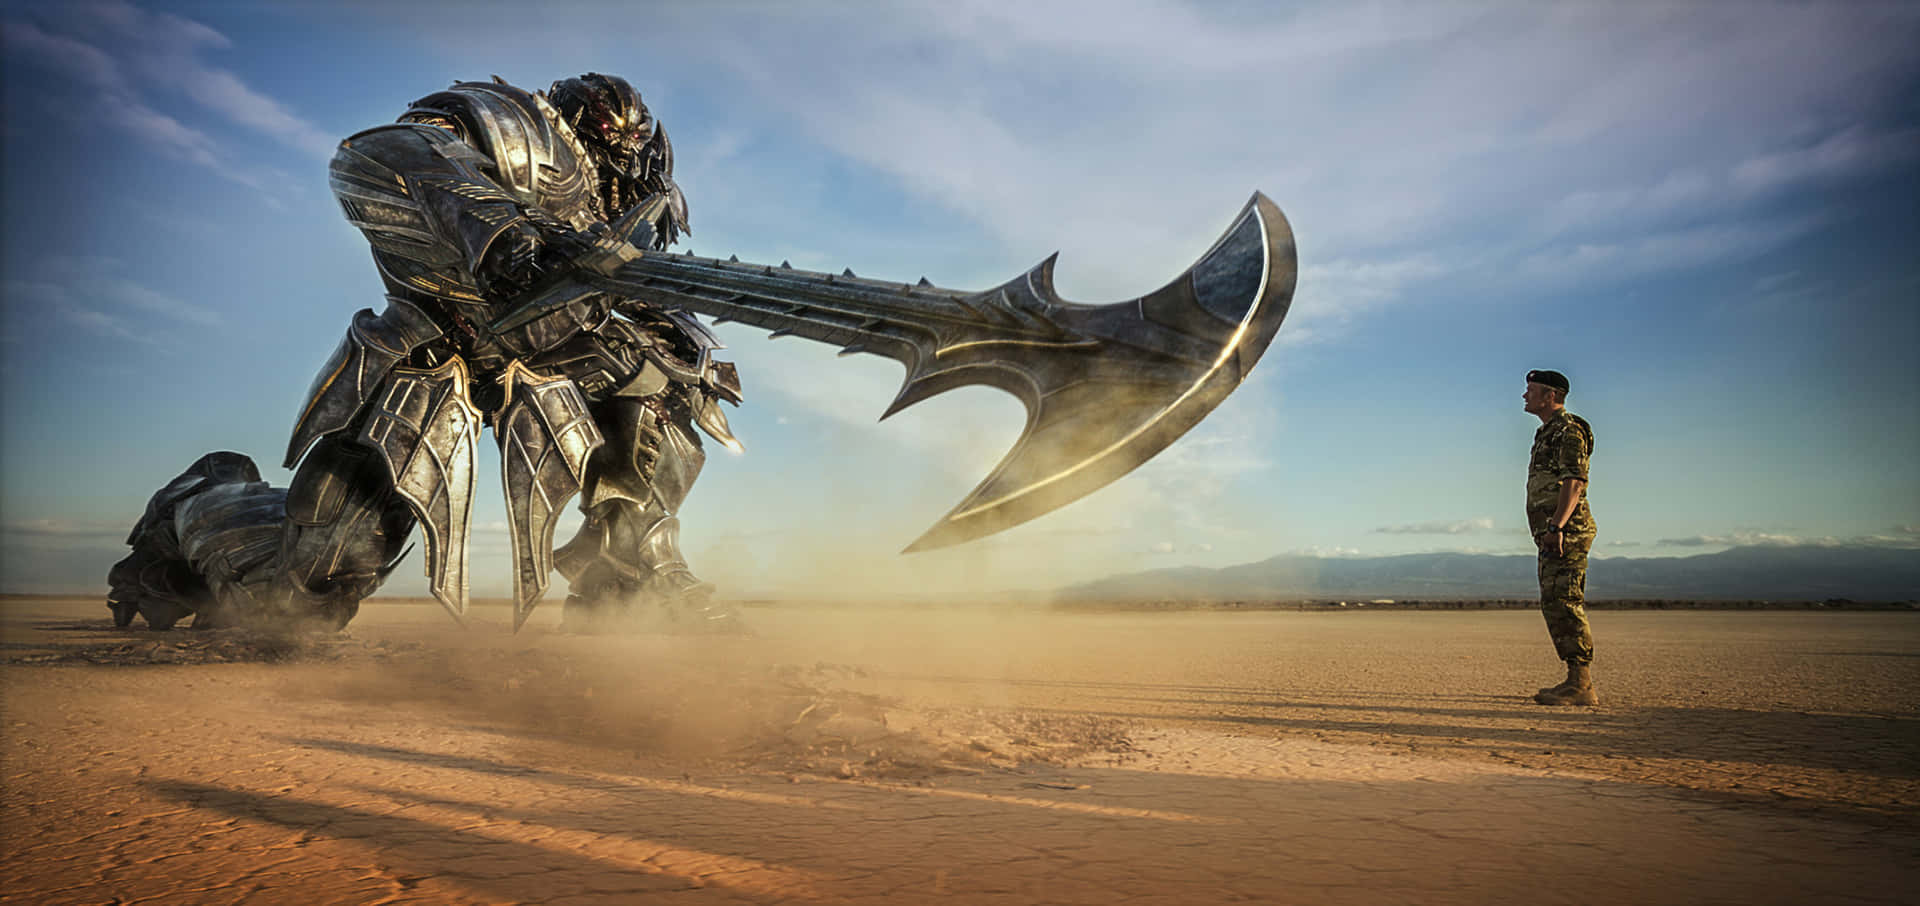 A stunning shot of a robotic warrior from the Transformers franchise.